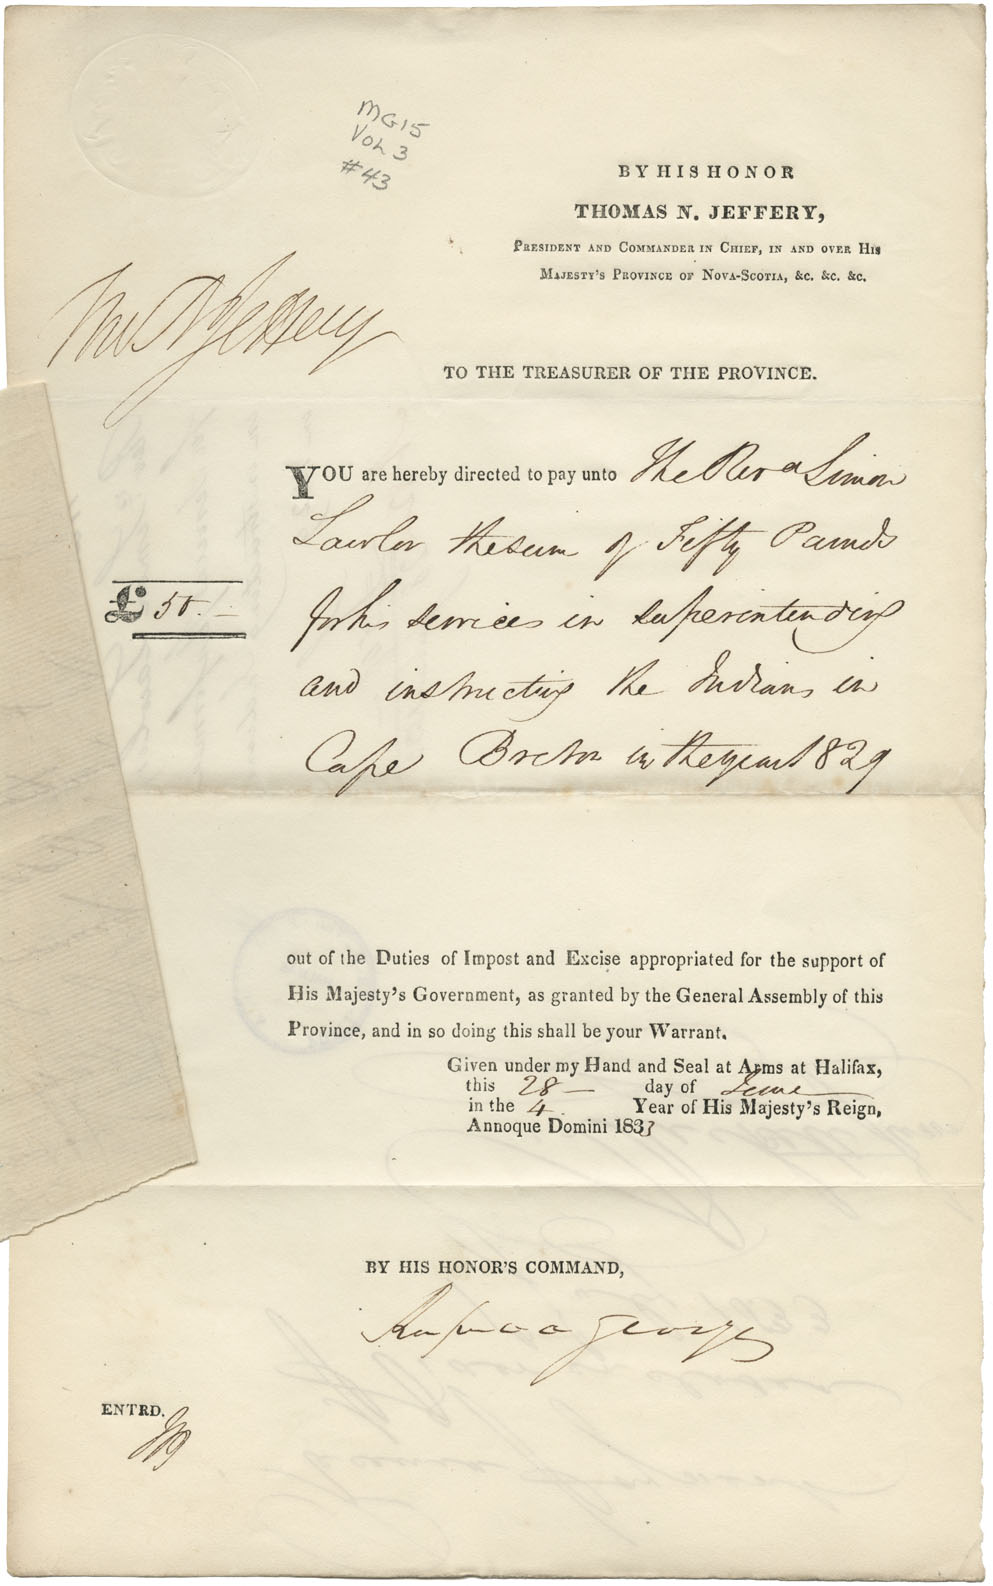 Order from Thomas Jeffrey to pay Rev. Simon Lawler £50 for superintending and instructing Mi'kmaq in Cape Breton in 1829.